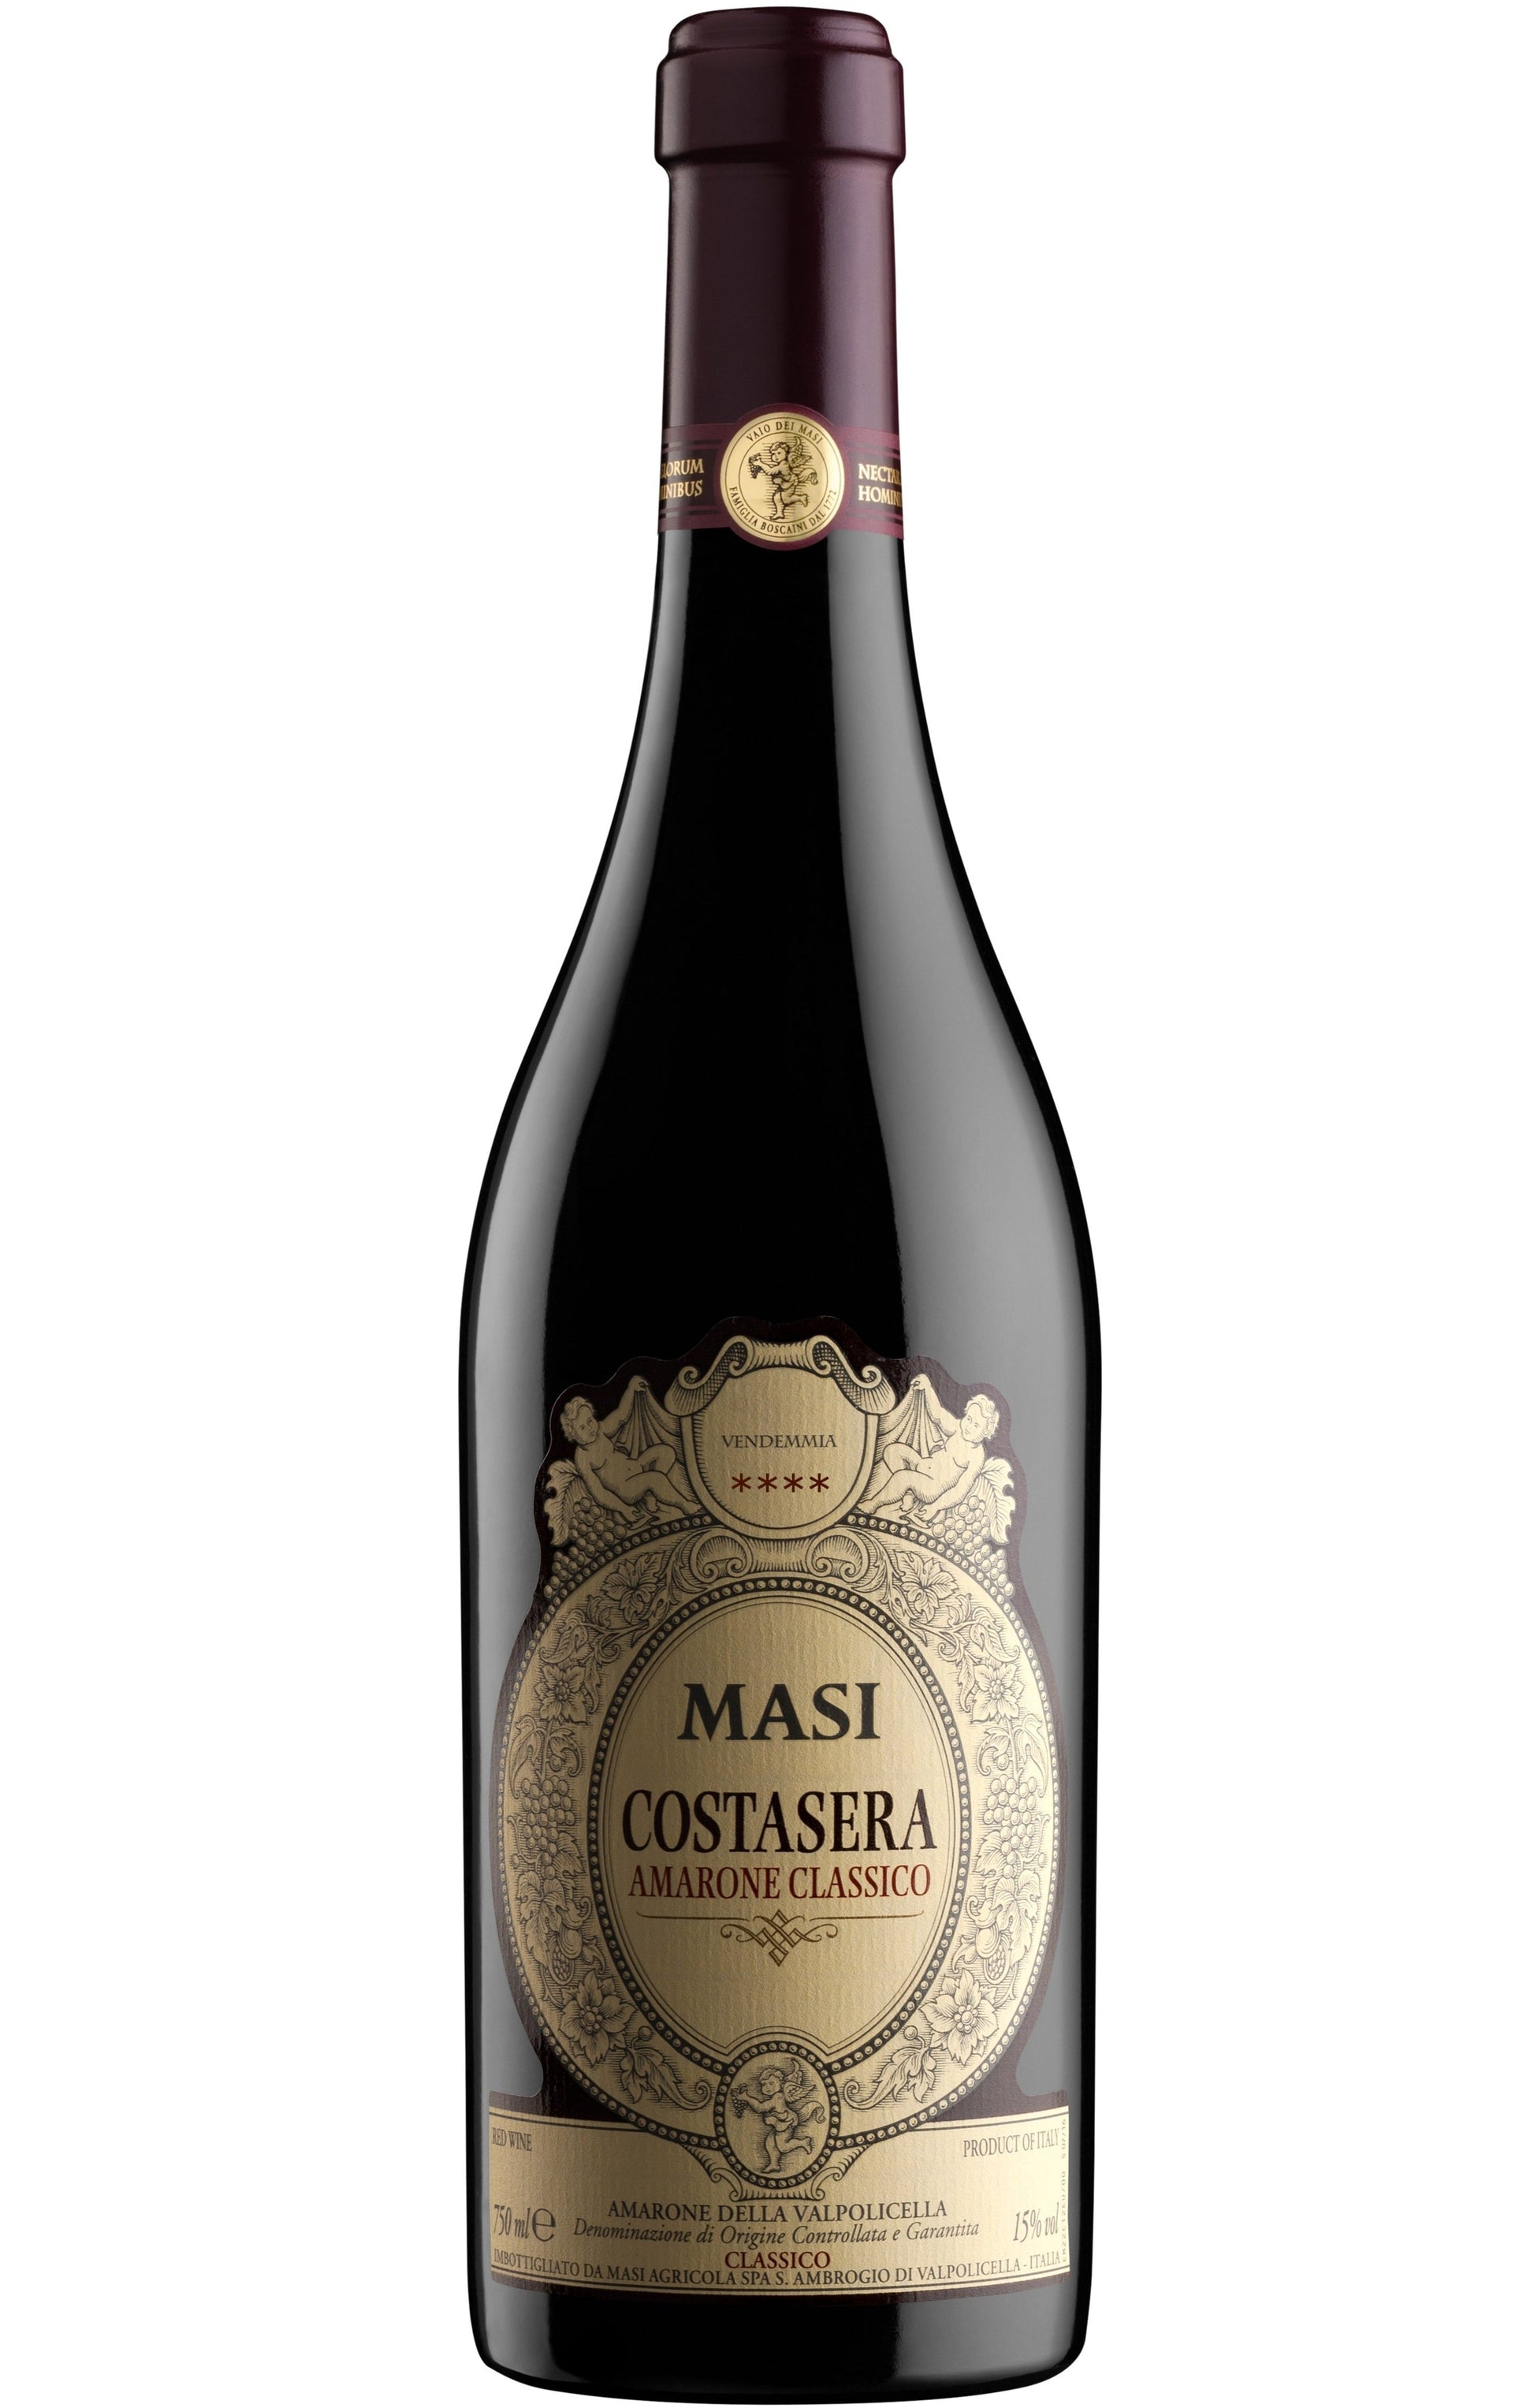 Masi Costasera Amarone Classico DOCG - Premium Red Wine from Masi - Shop now at Whiskery